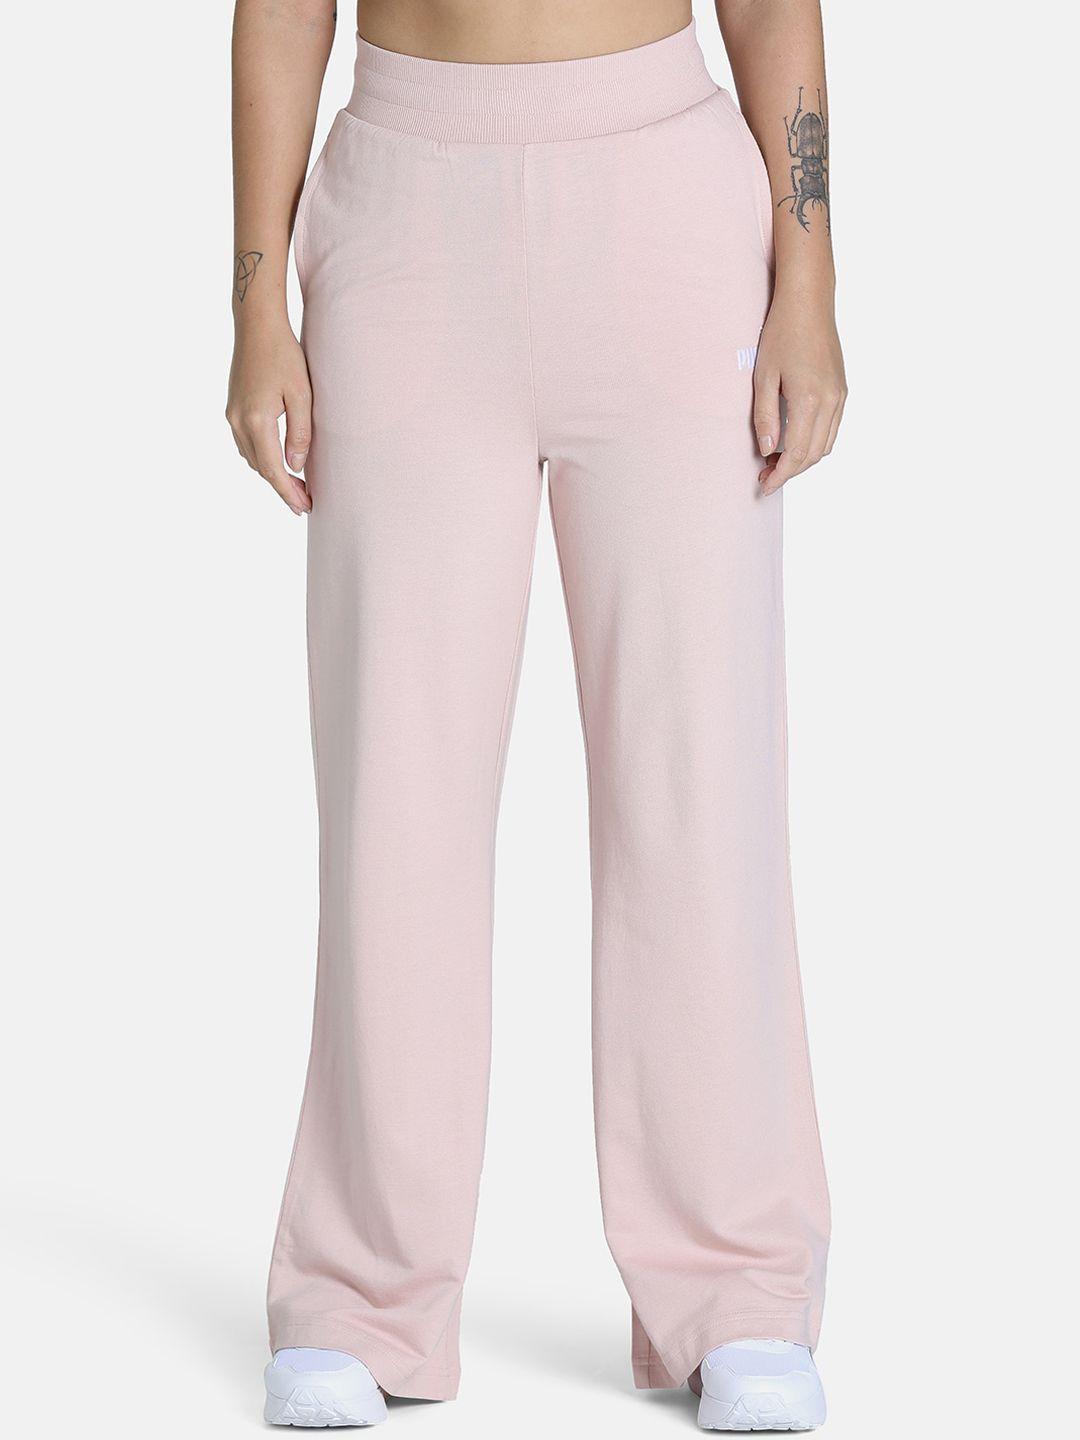 puma-women-pink-solid-pure-cotton-flared-track-pants